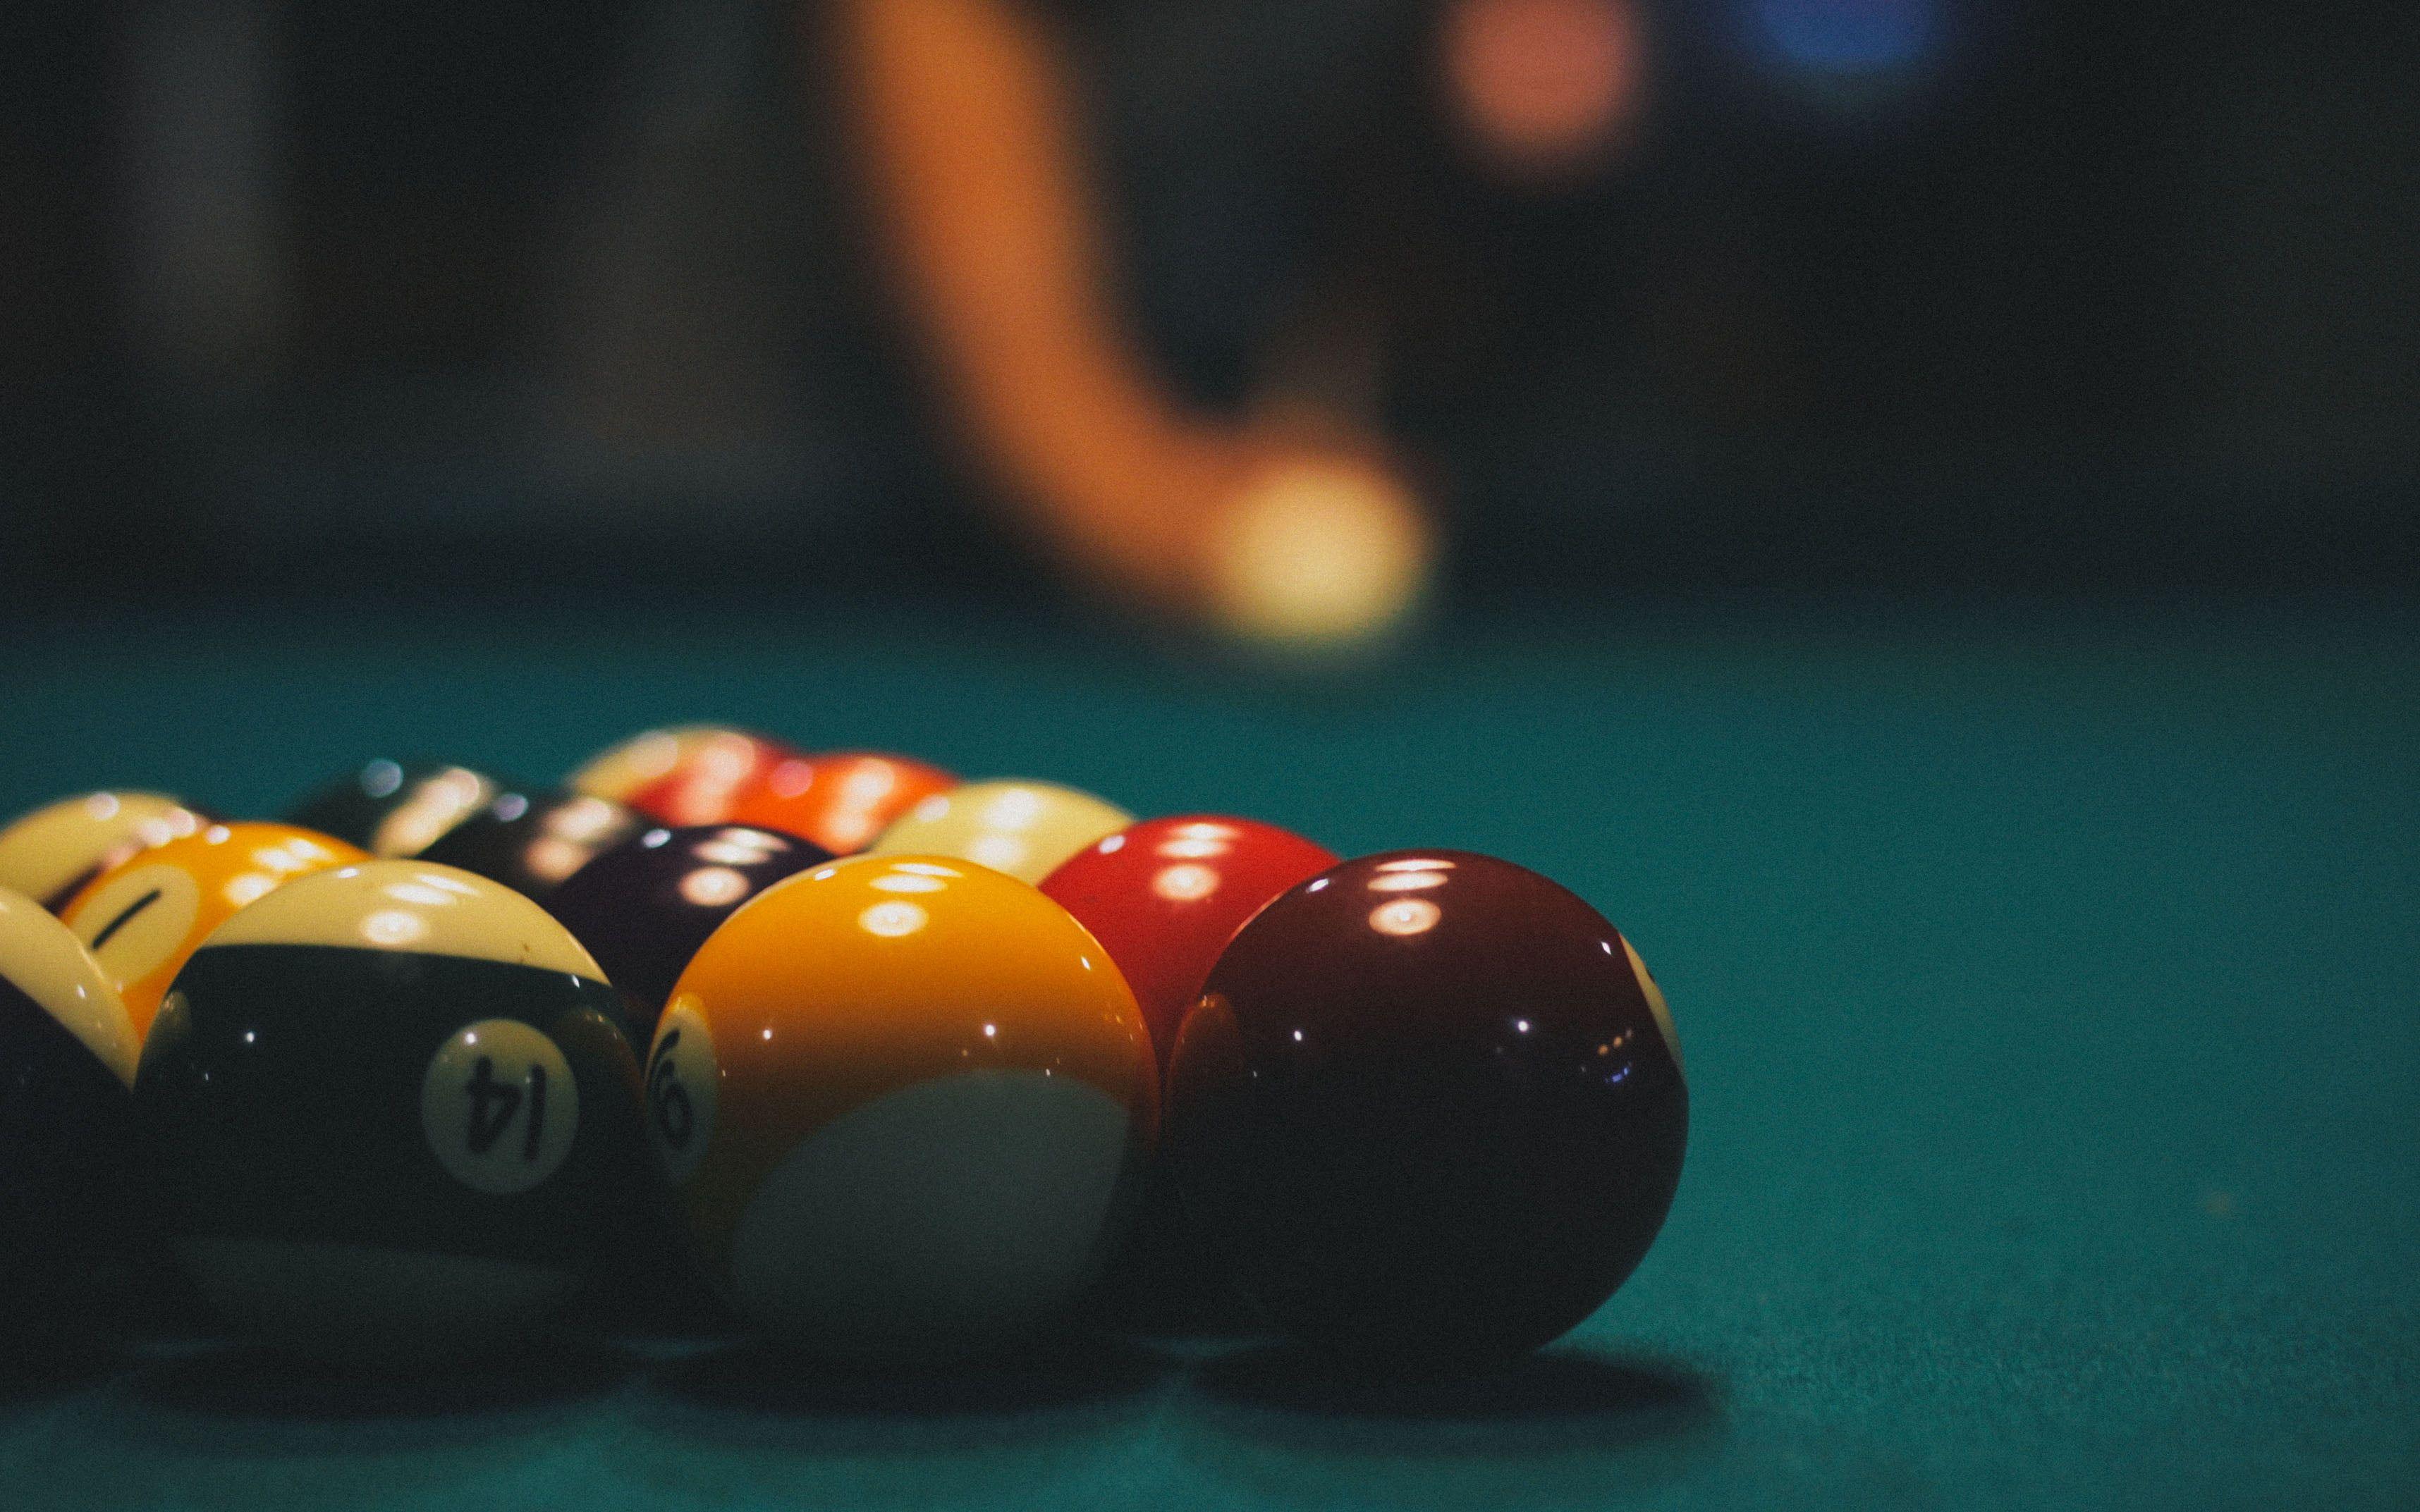 Billiards Wallpapers (48+ images inside)